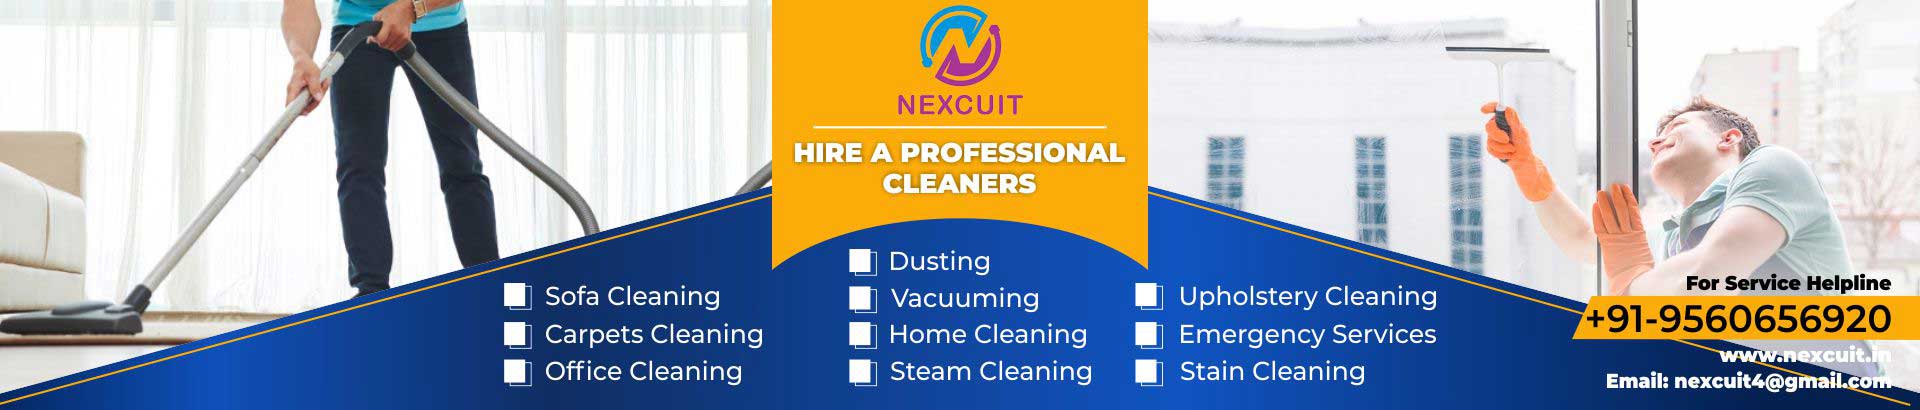 Home cleaning service in delhi